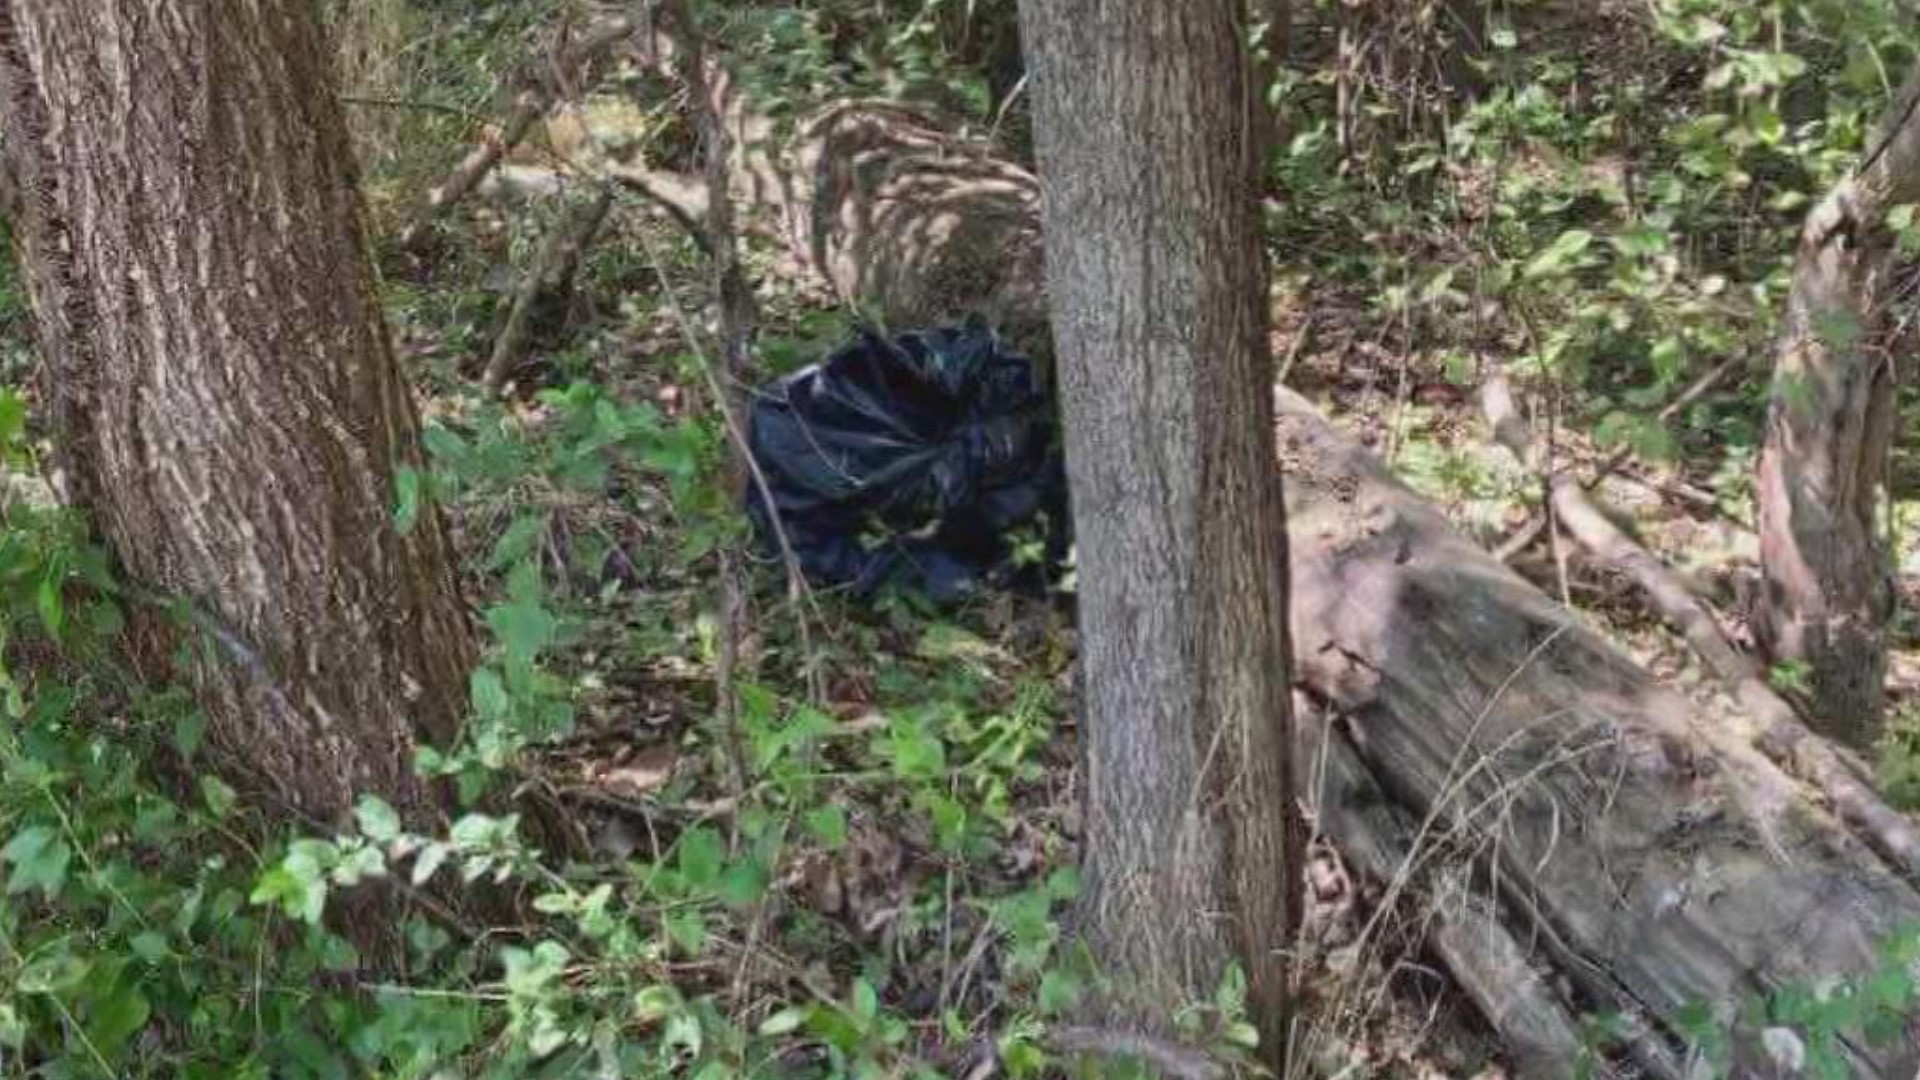 More than a dozen dead dogs and cats have been found this year, and many more dating back to 2019, on the road leading to Lock and Dam 13.